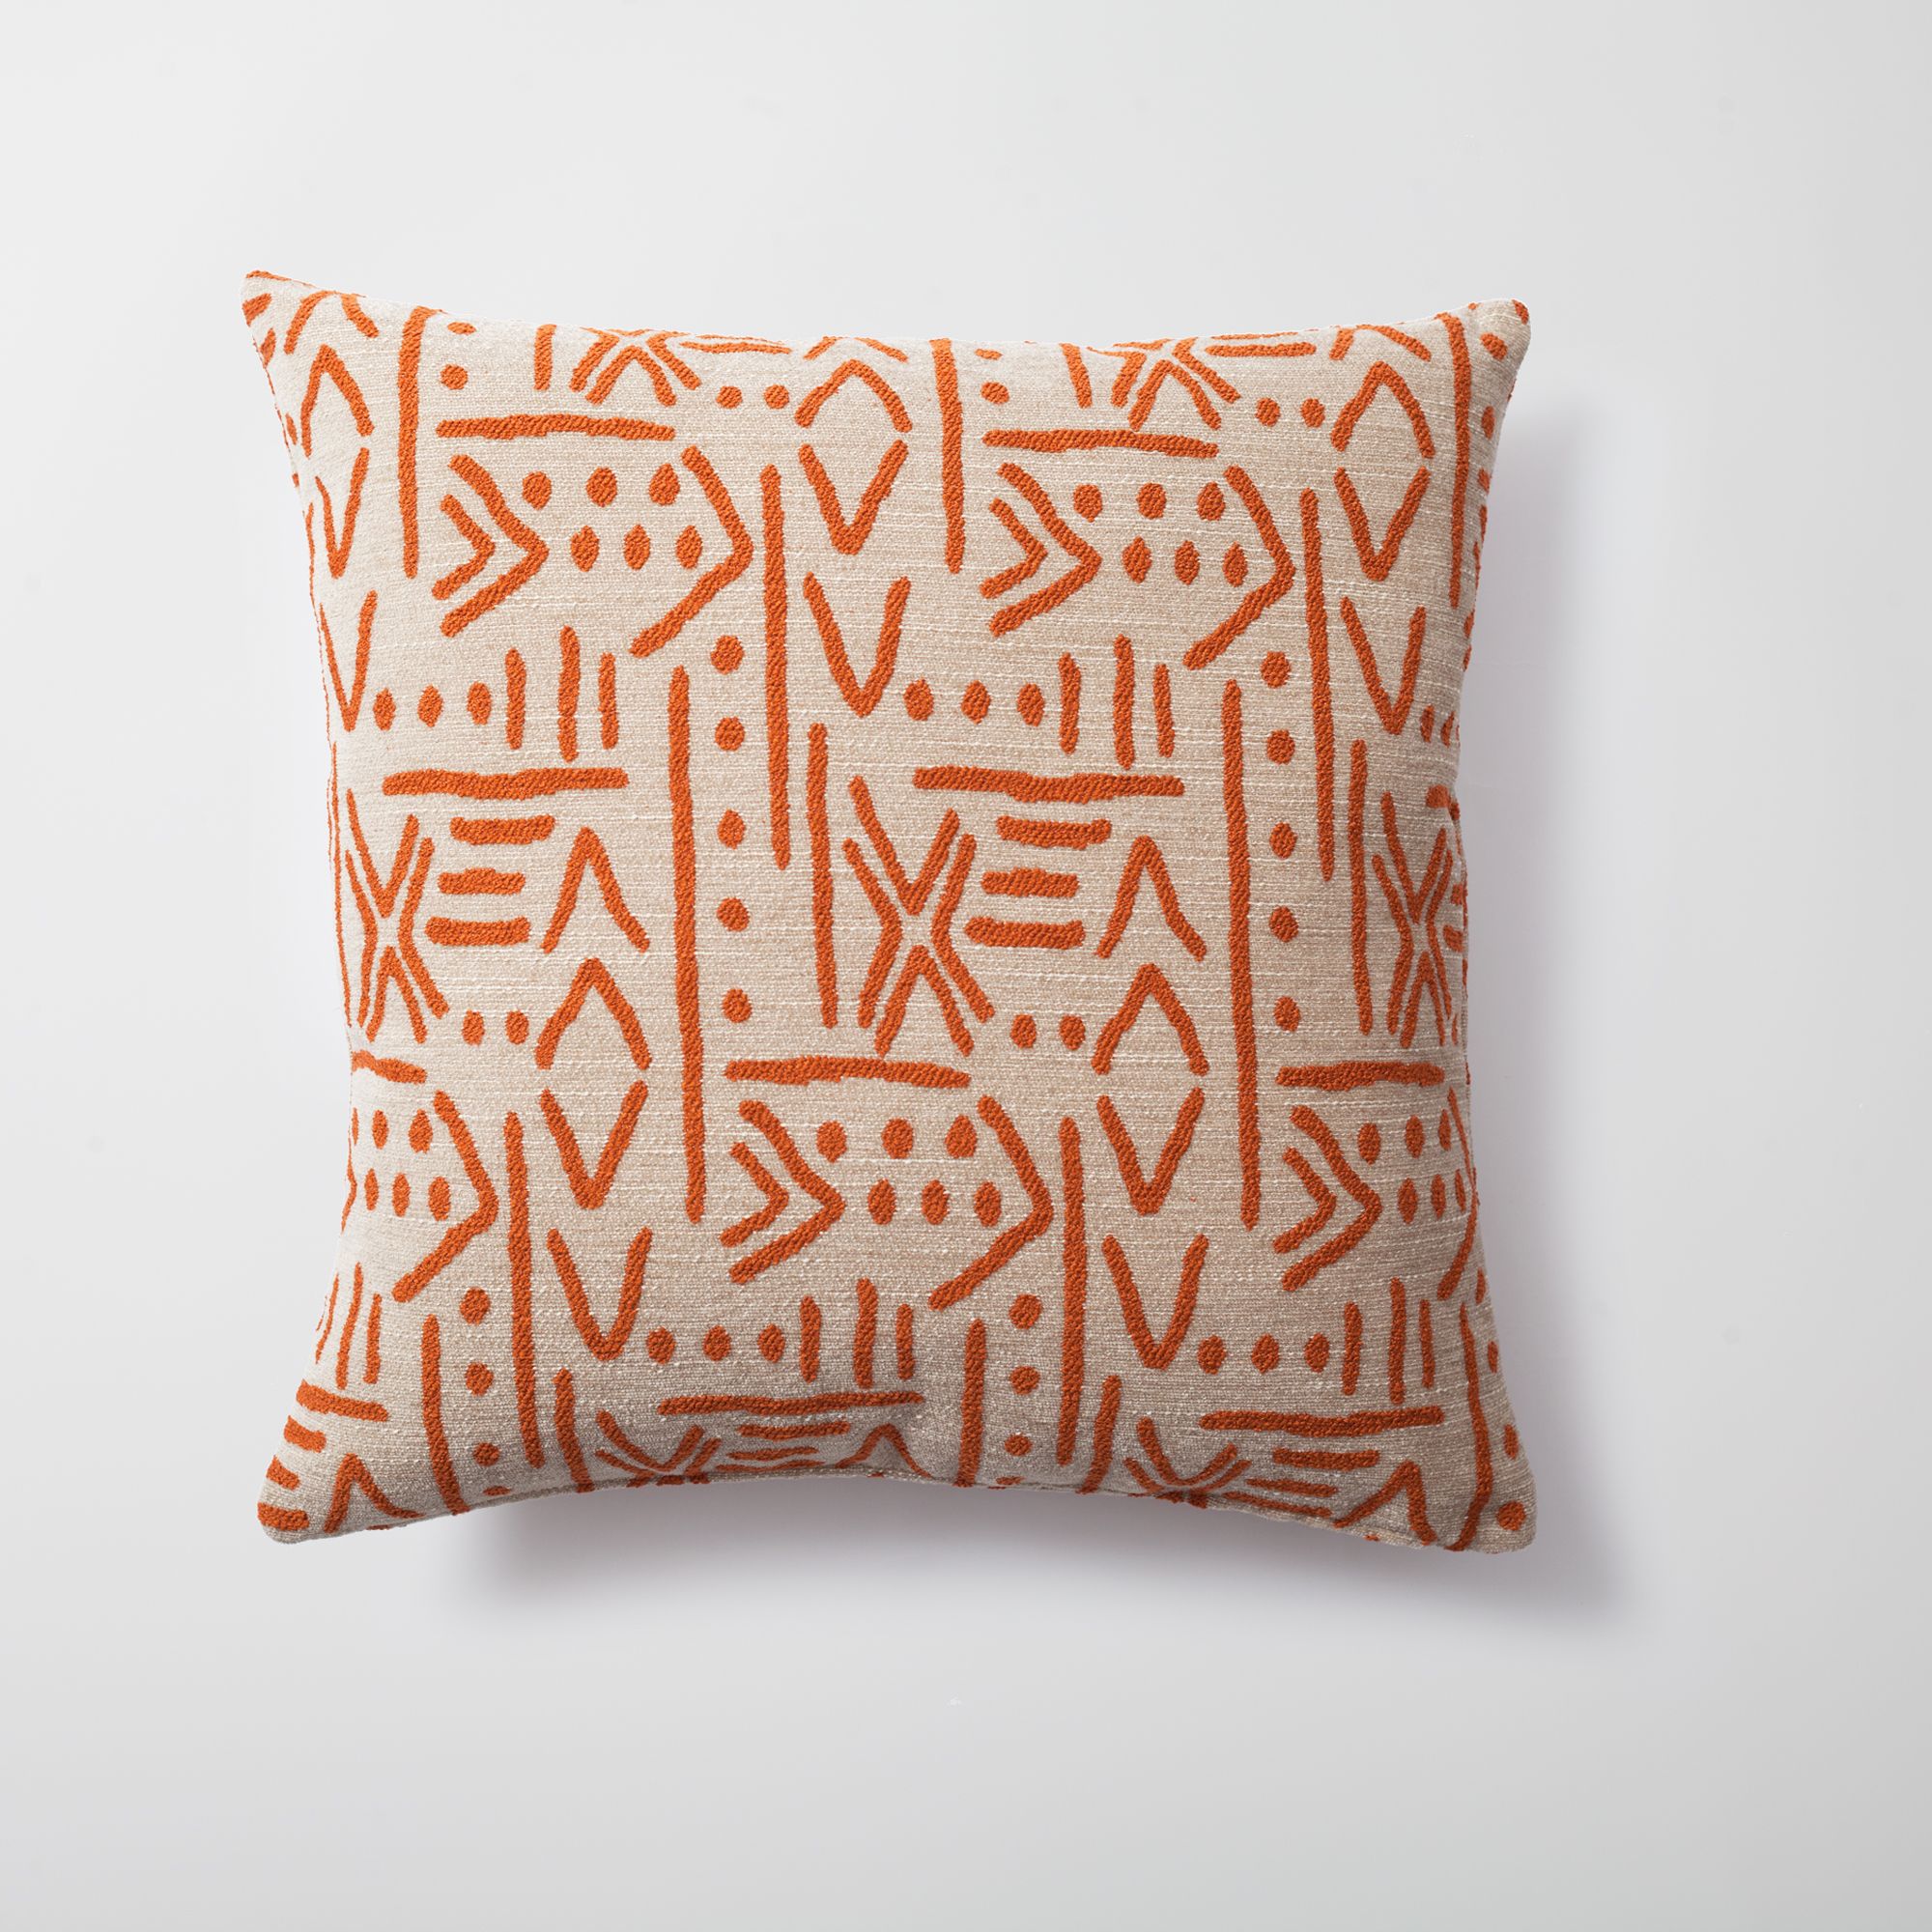 "Icon" - African Patterned 18x18 Inch Linen Pillow - Orange (Cover Only)